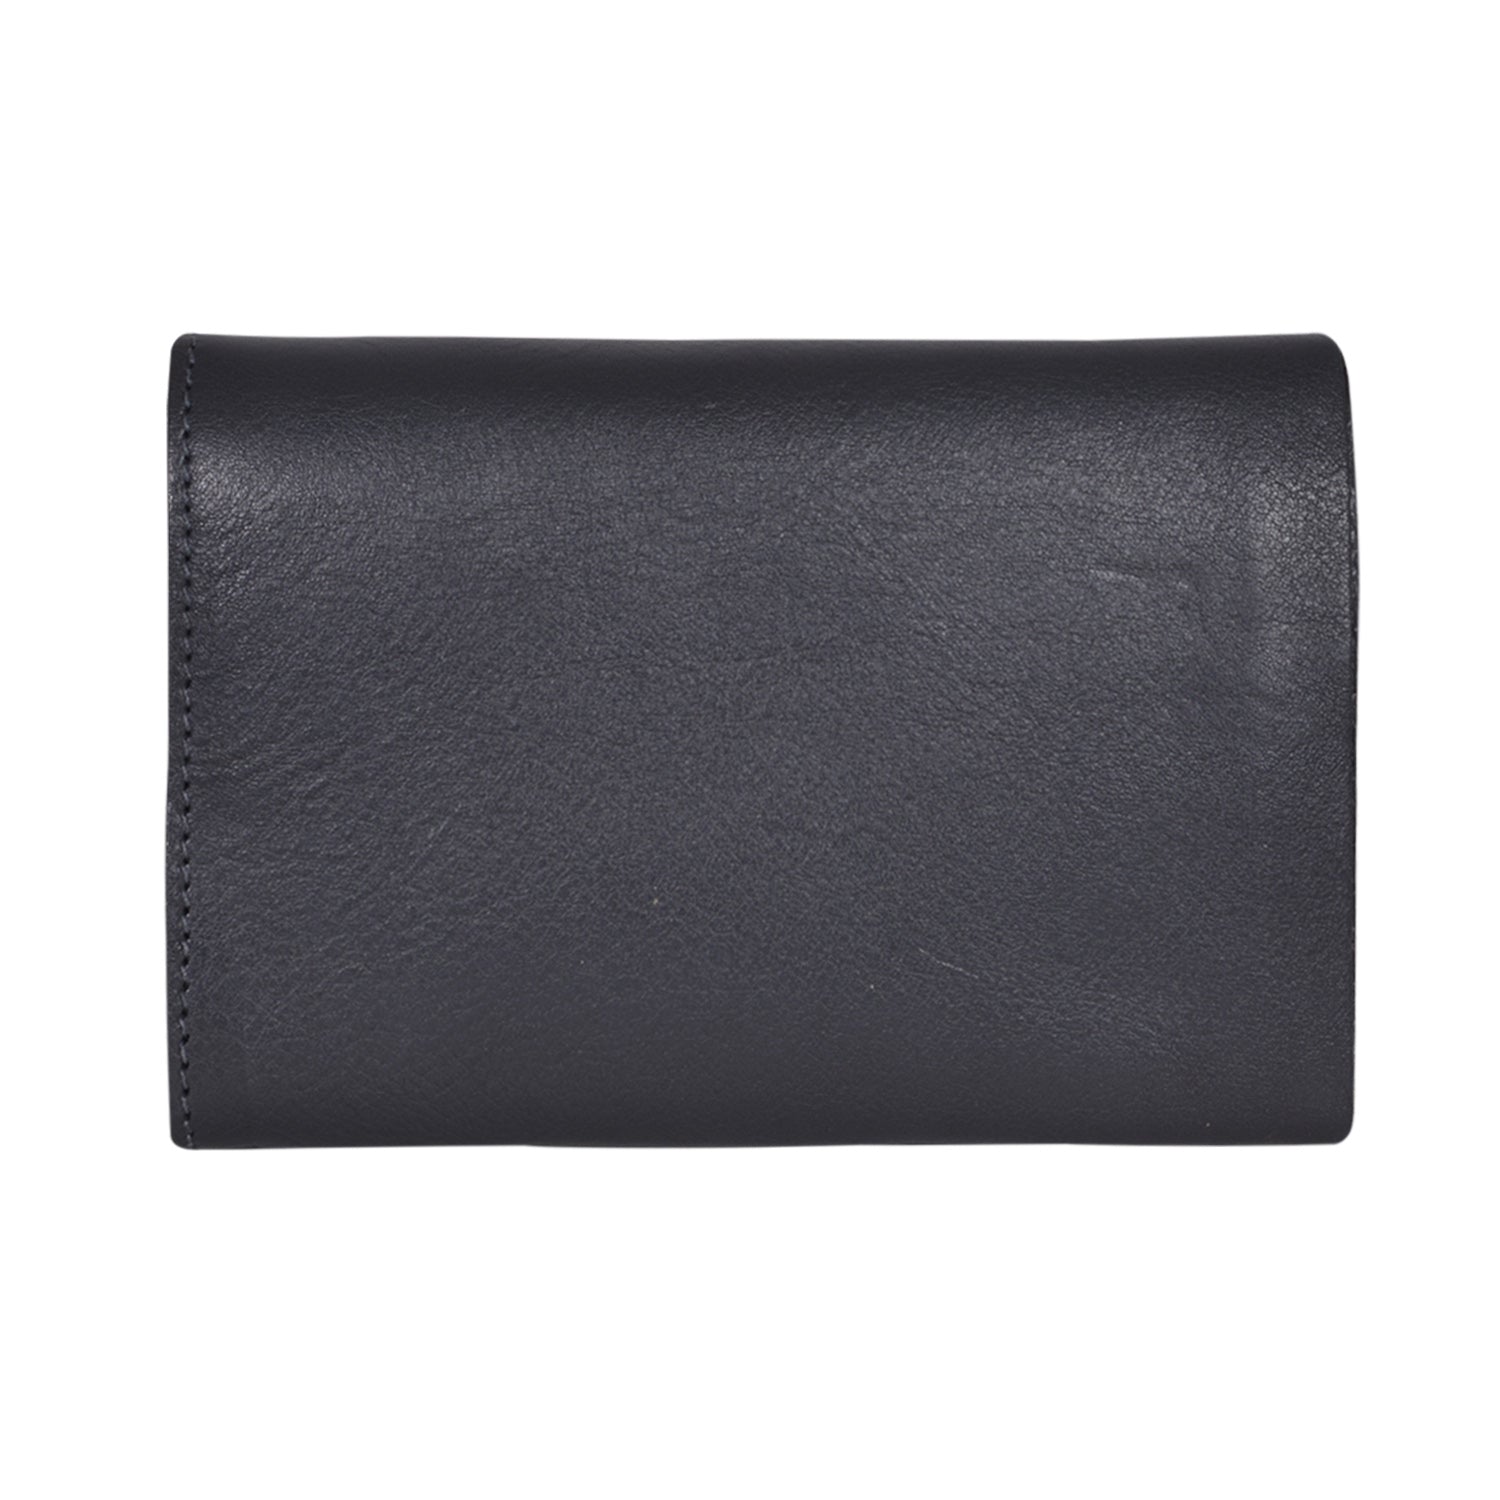 IL BISONTE UNISEX COMPACT FOLDING WALLET IN GREY  COWHIDE LEATHER